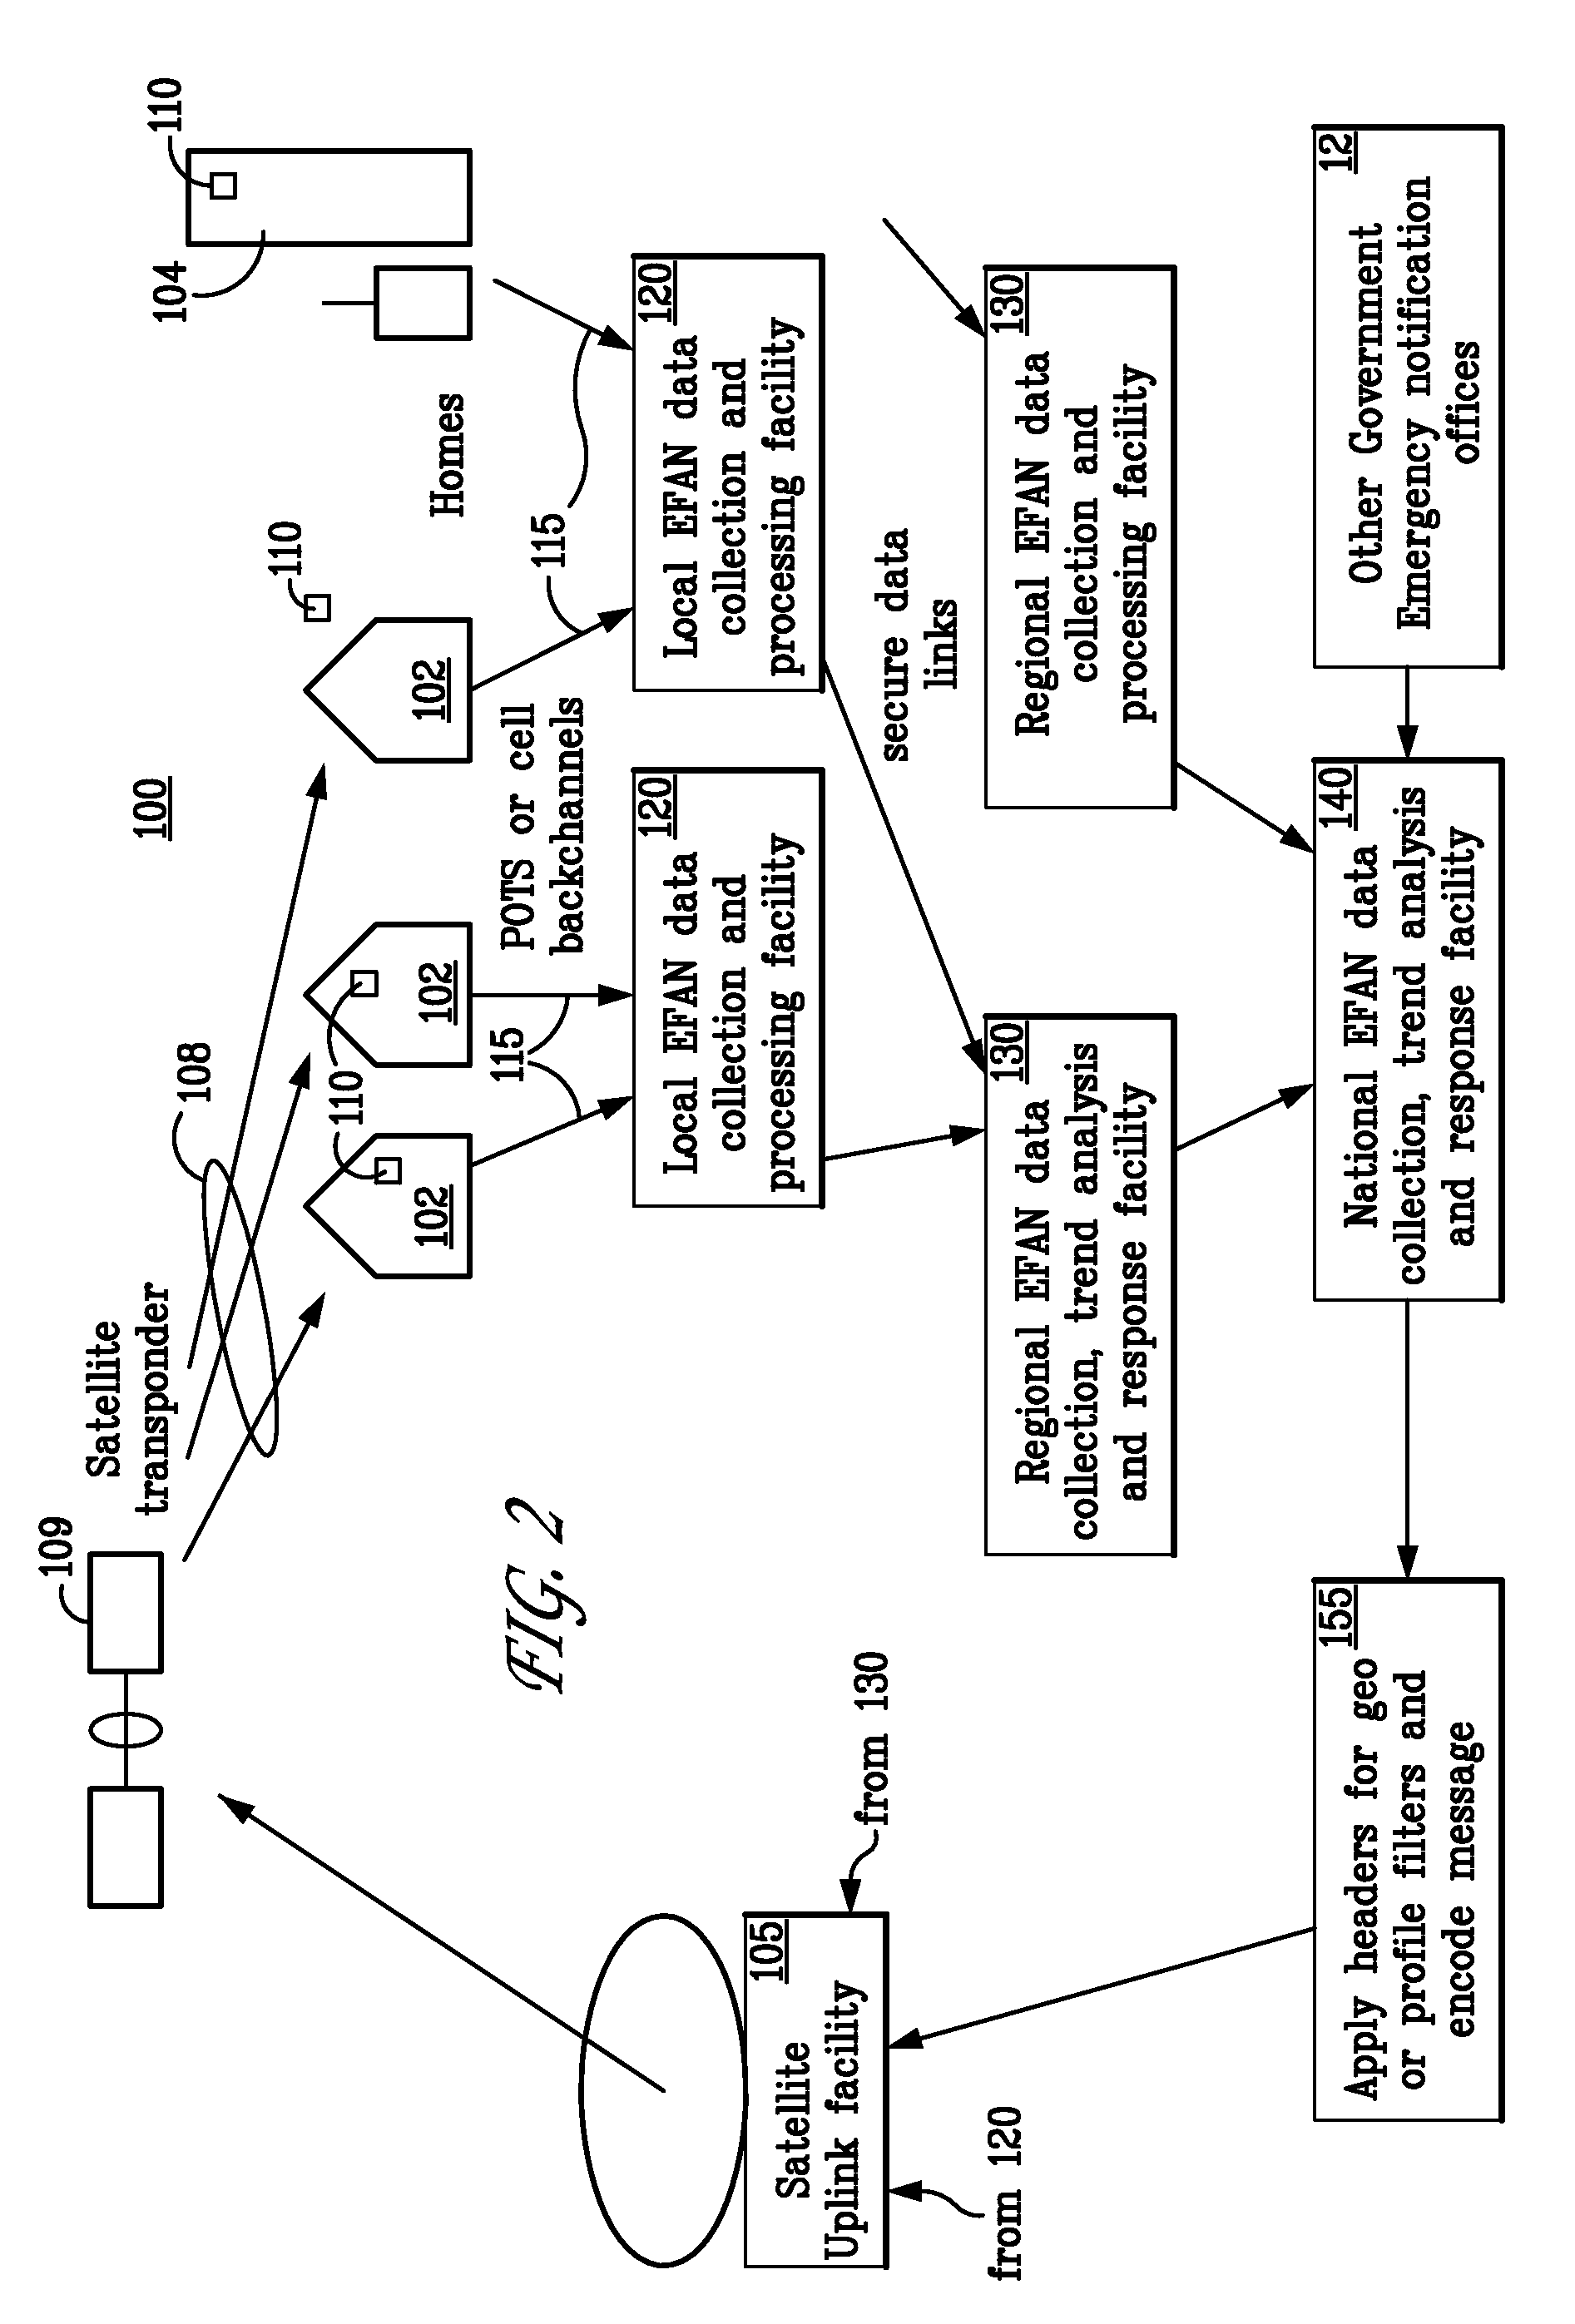 System and Method for Emergency Notification Content Delivery